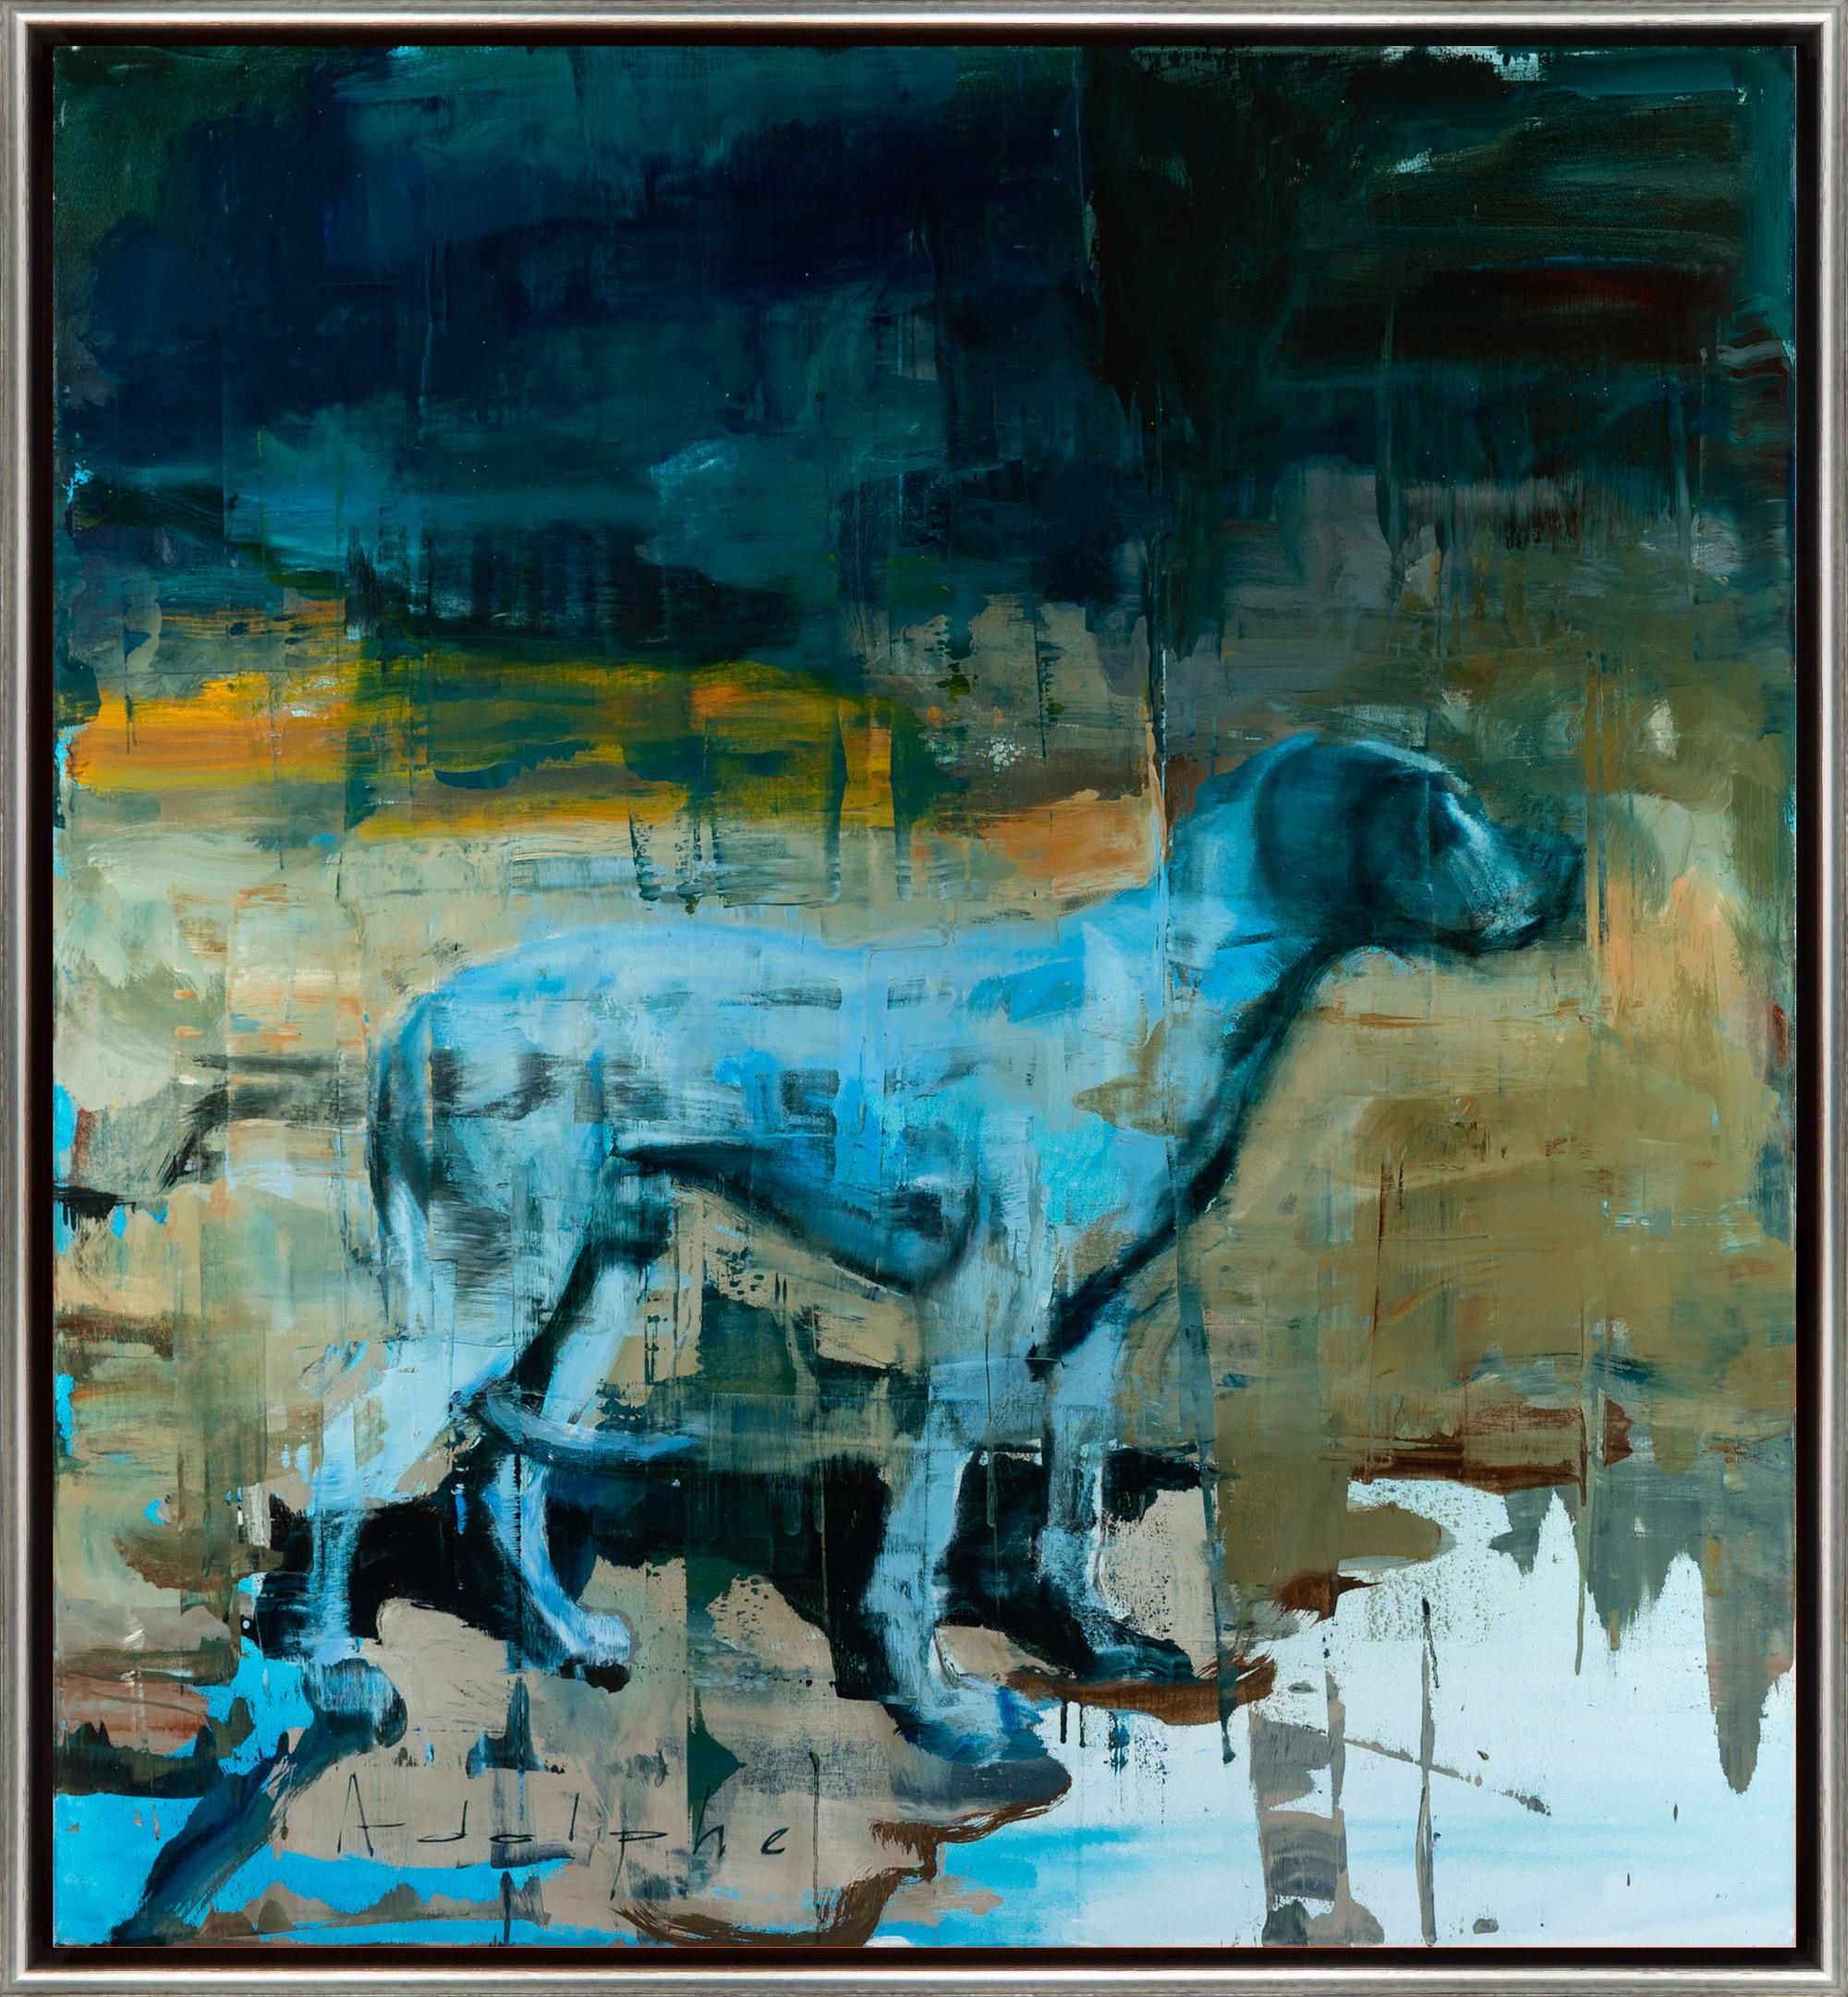 Joseph Adolphe Abstract Painting - "The Entrance" Abstract Dog Oil on Canvas Painting